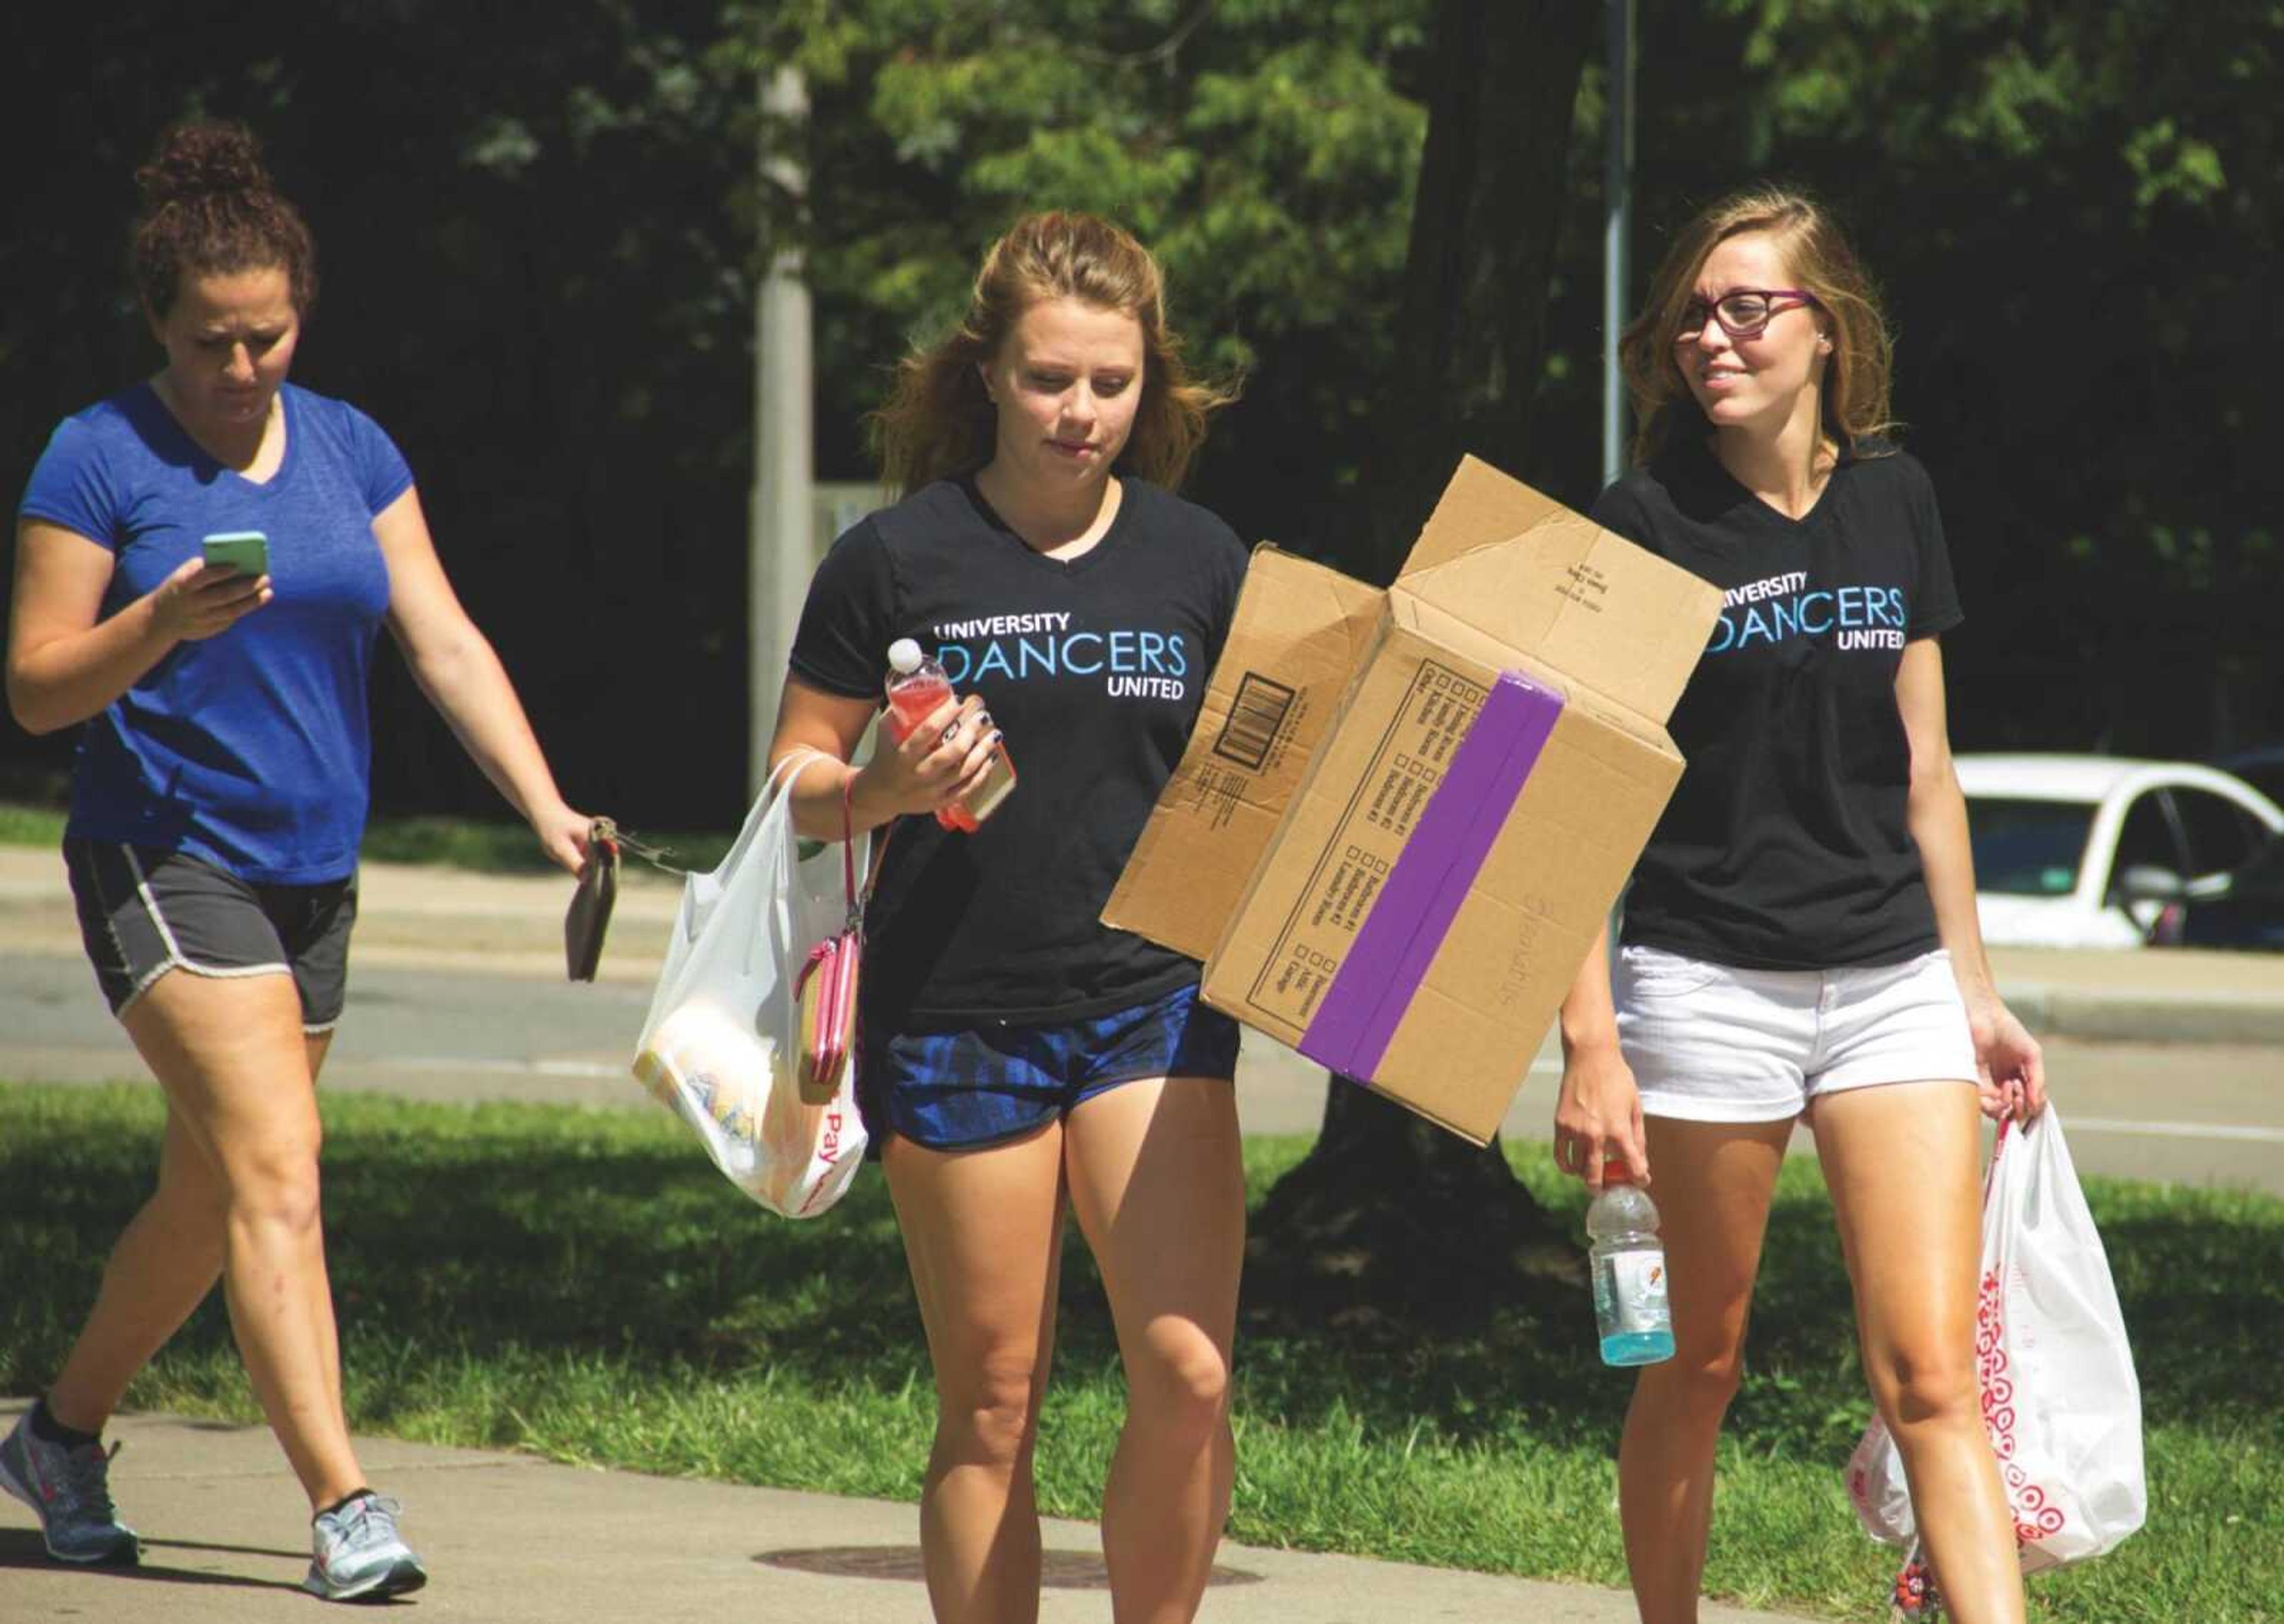 Incoming freshman moved onto Southeast's campus on Aug. 20. Upperclassmen volunteers helped carry in boxes and students' other belongings at Towers Complex.